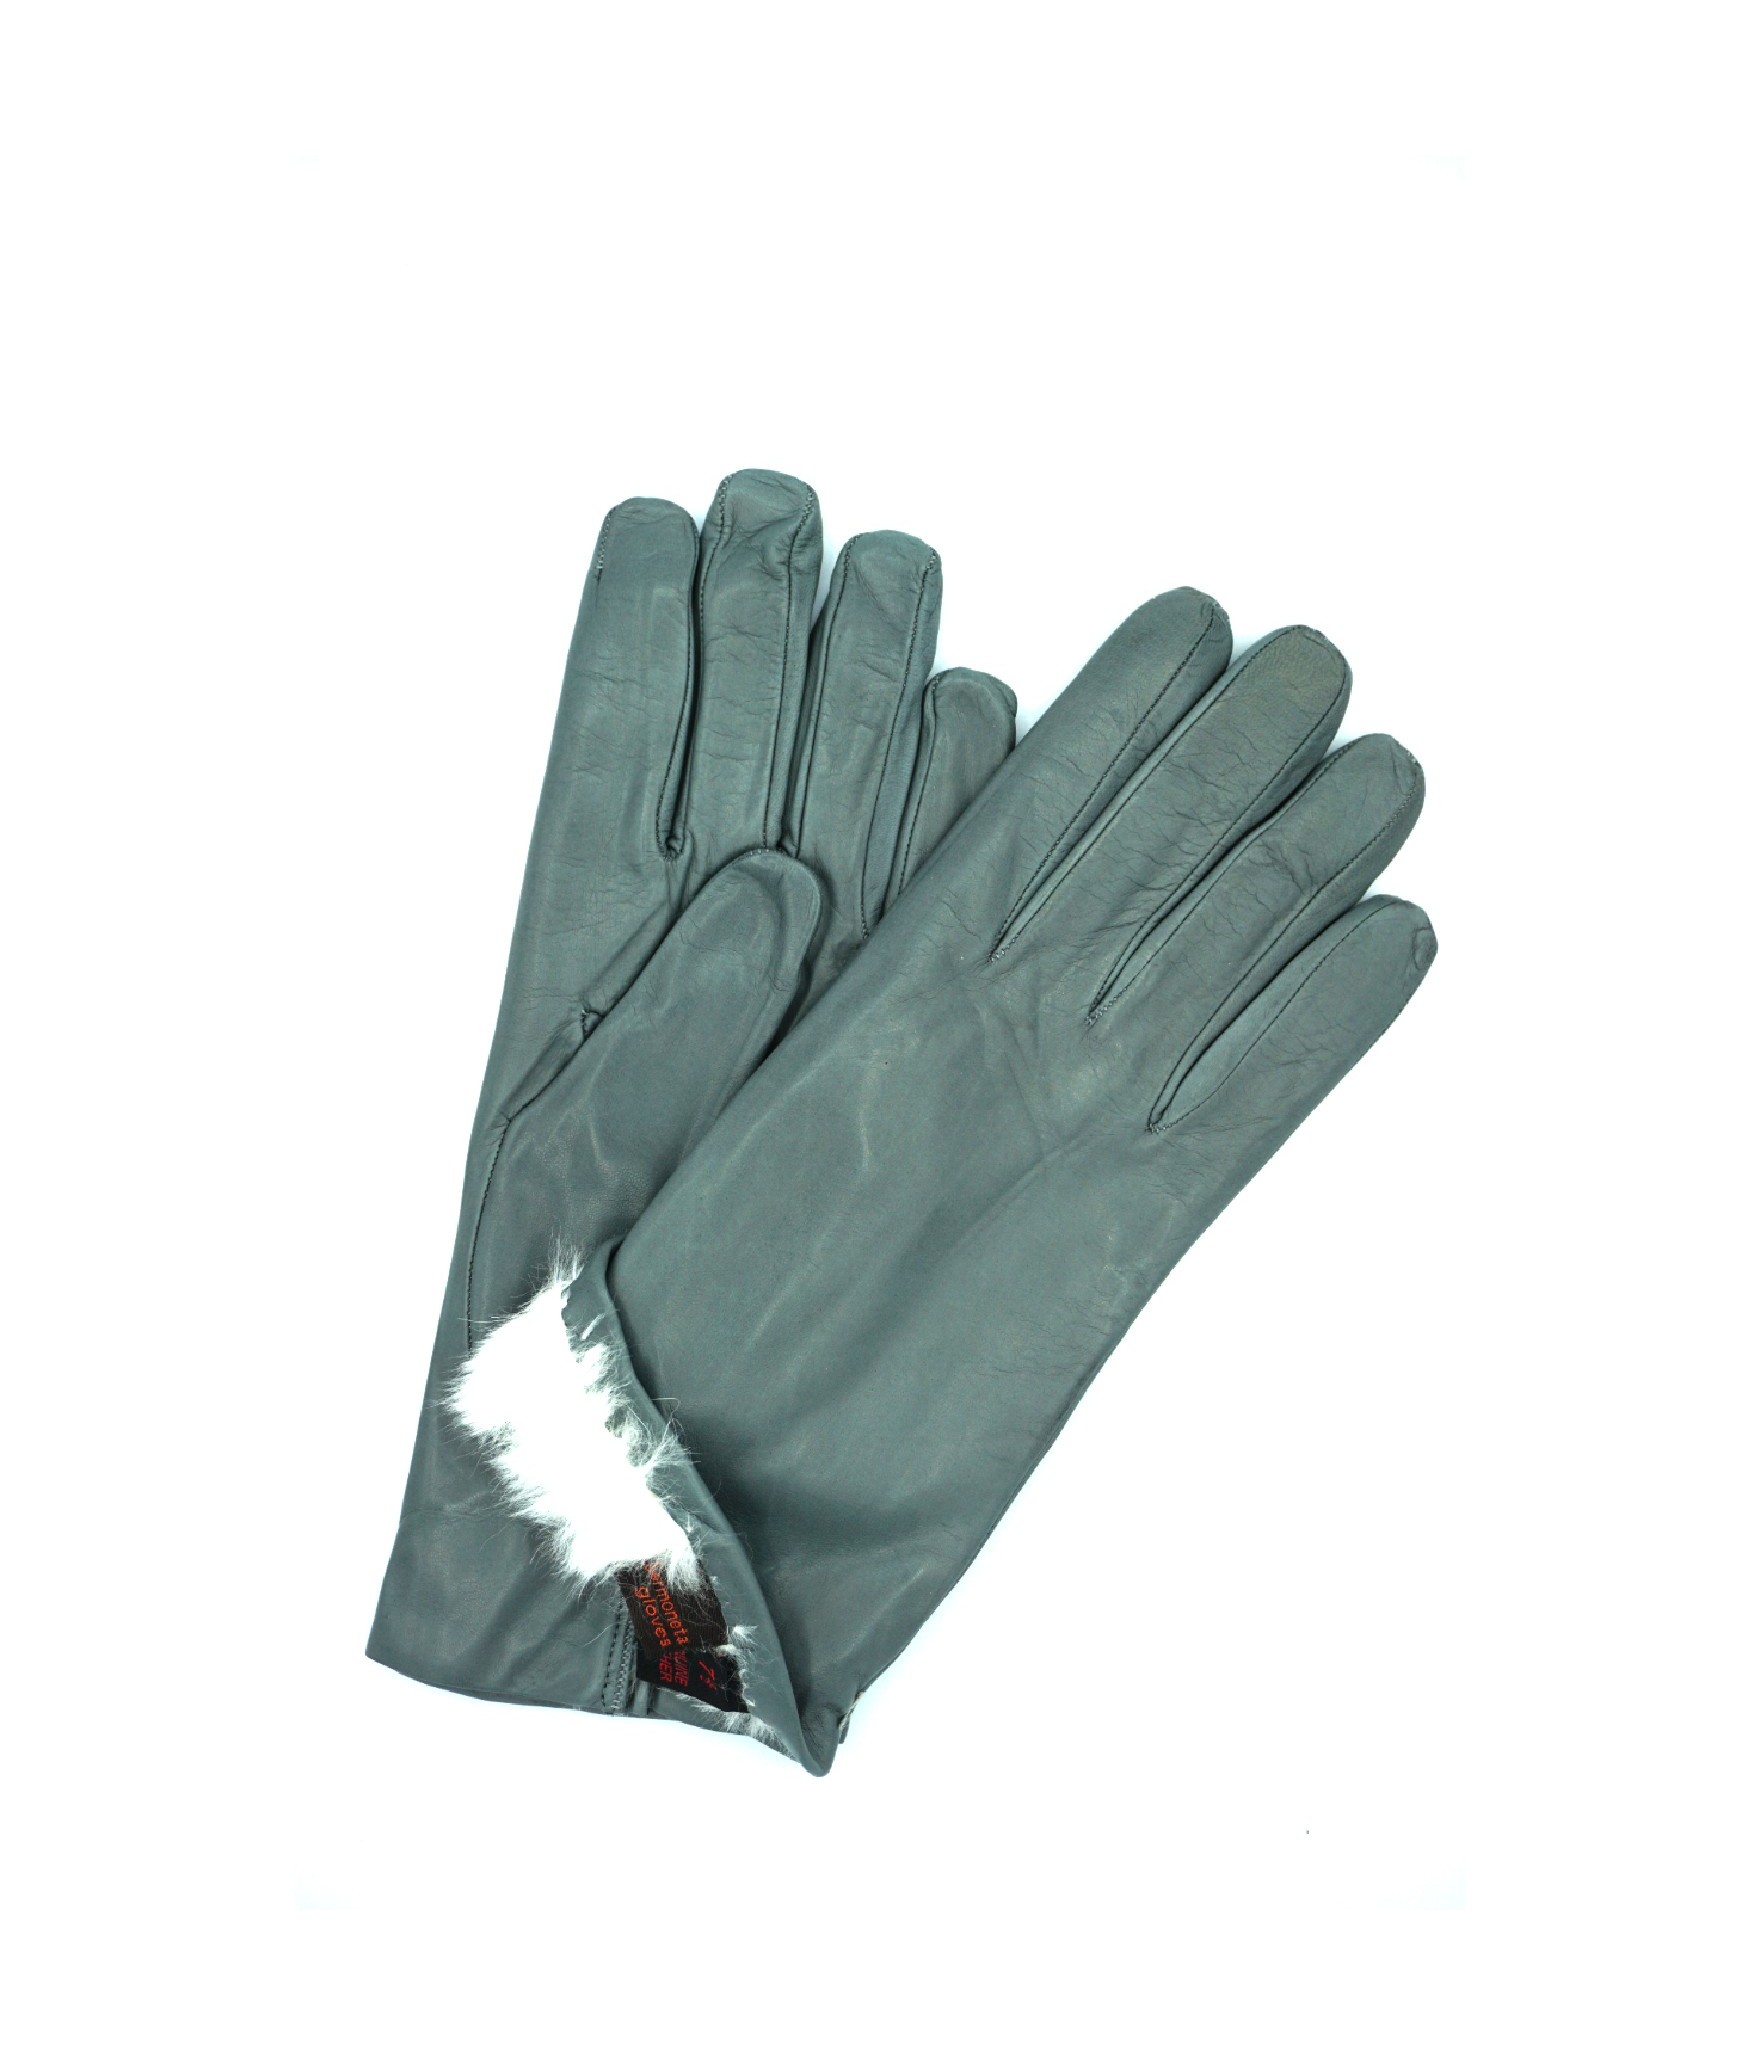 1022 Classic Leather Gloves Lined White Rabbit Grey 